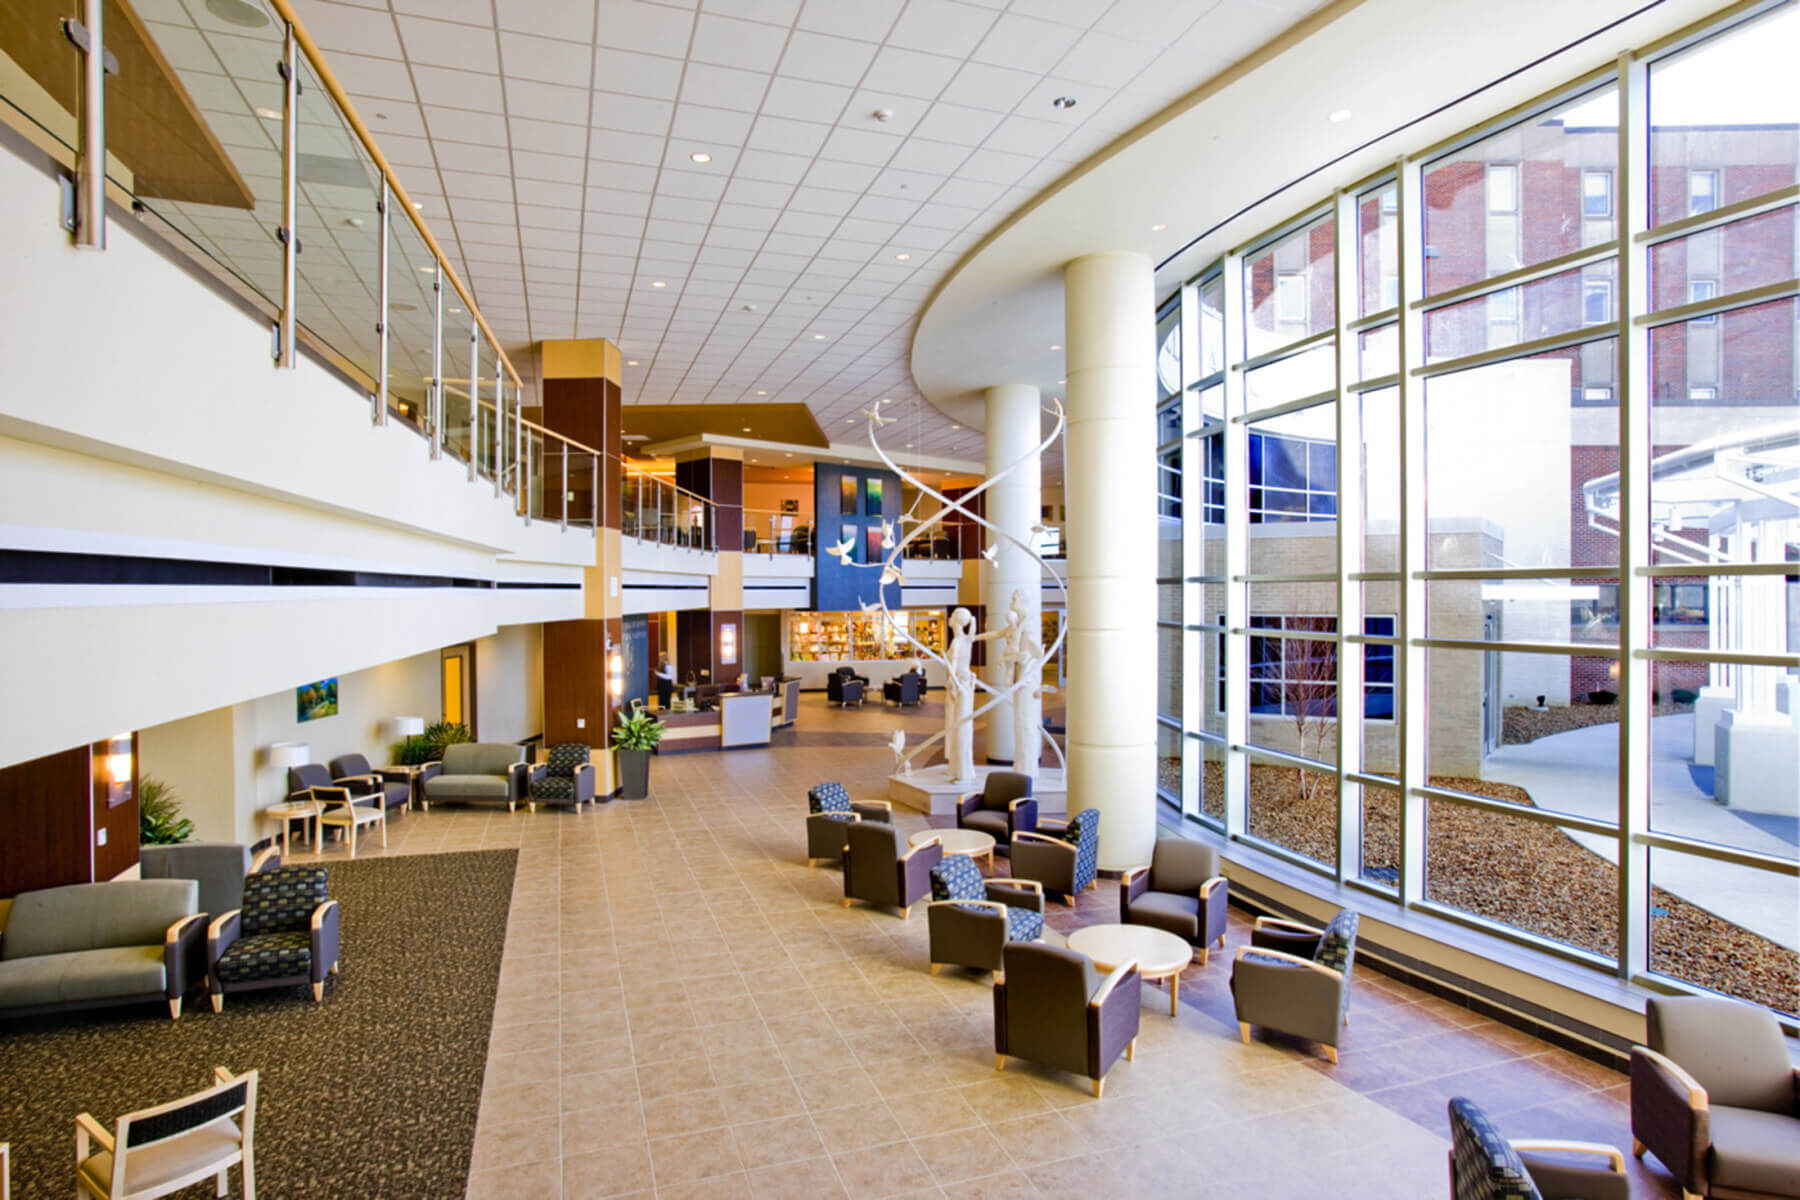 two-story lobby with large windows and lots of seating areas